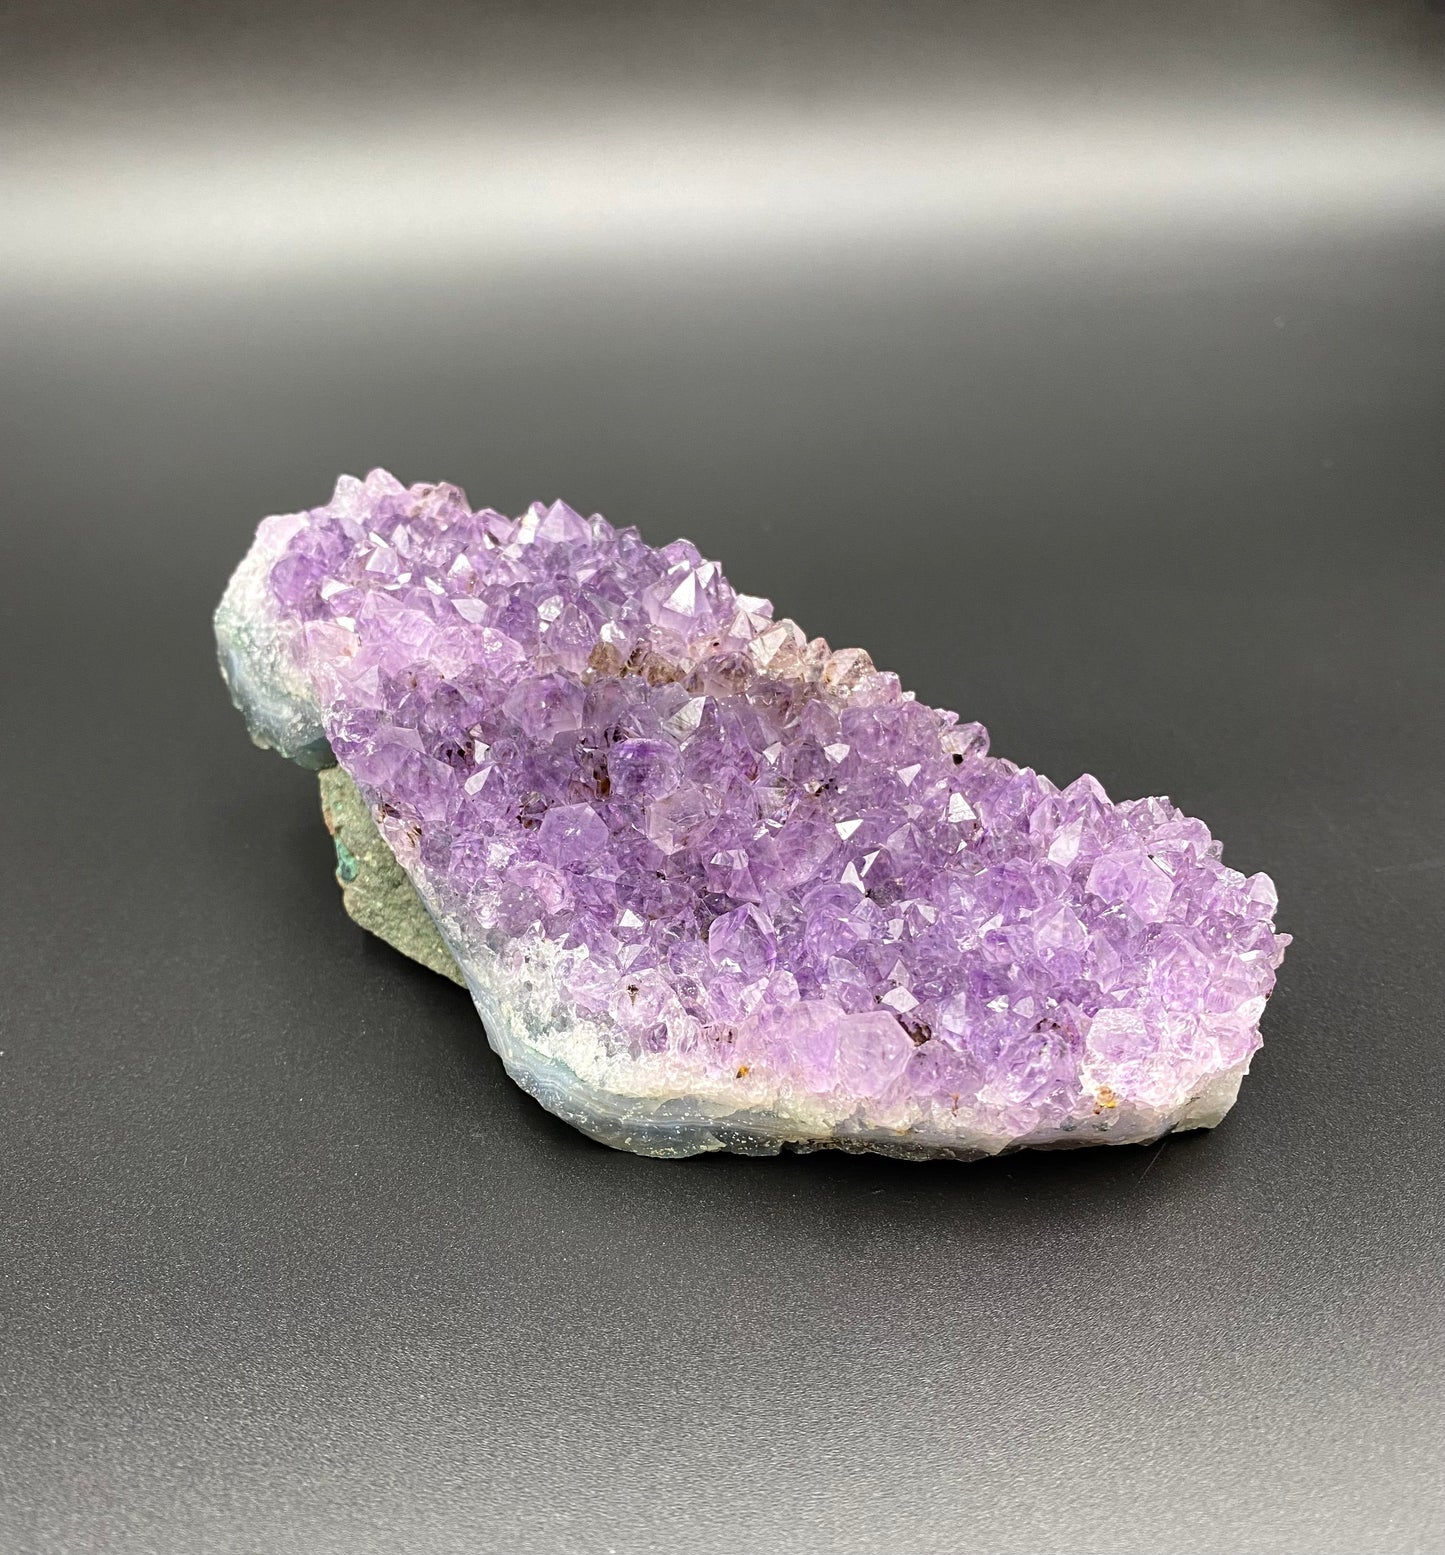 Follow Your Intuition: "Take the Next Right Step" Amethyst Druzy Plate